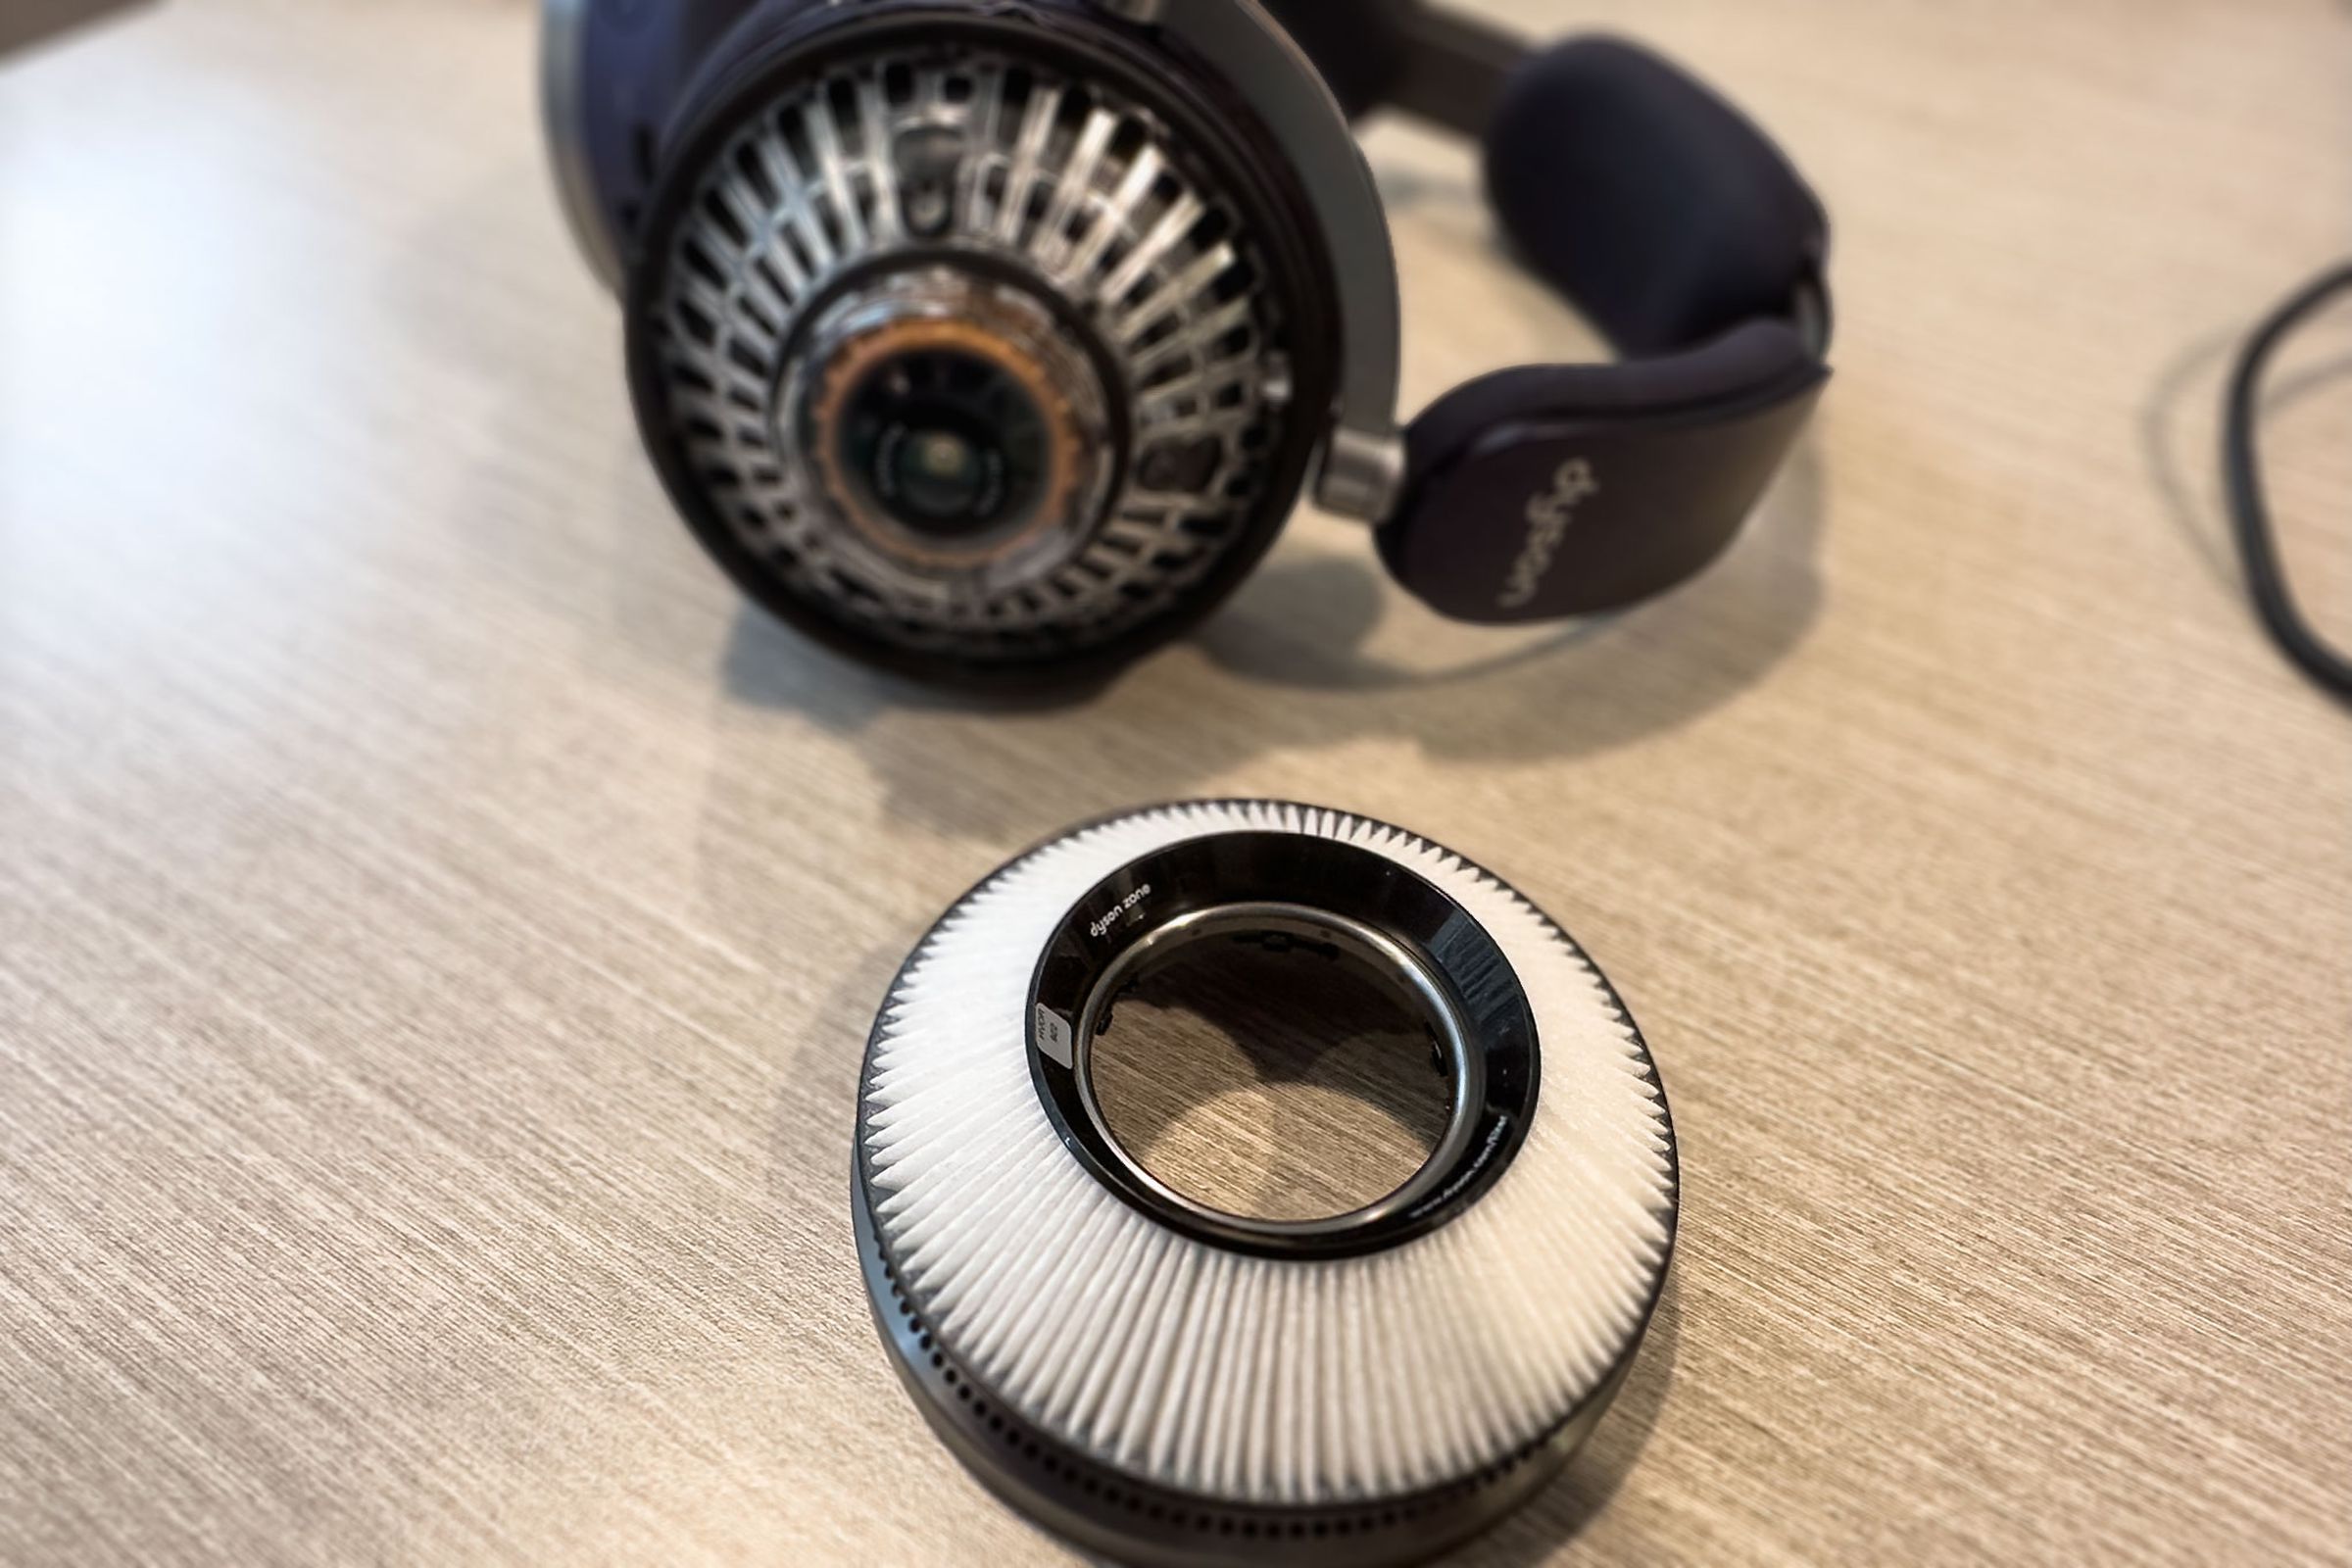 A close-up of the Dyson Zone’s filter with the headphones in the background